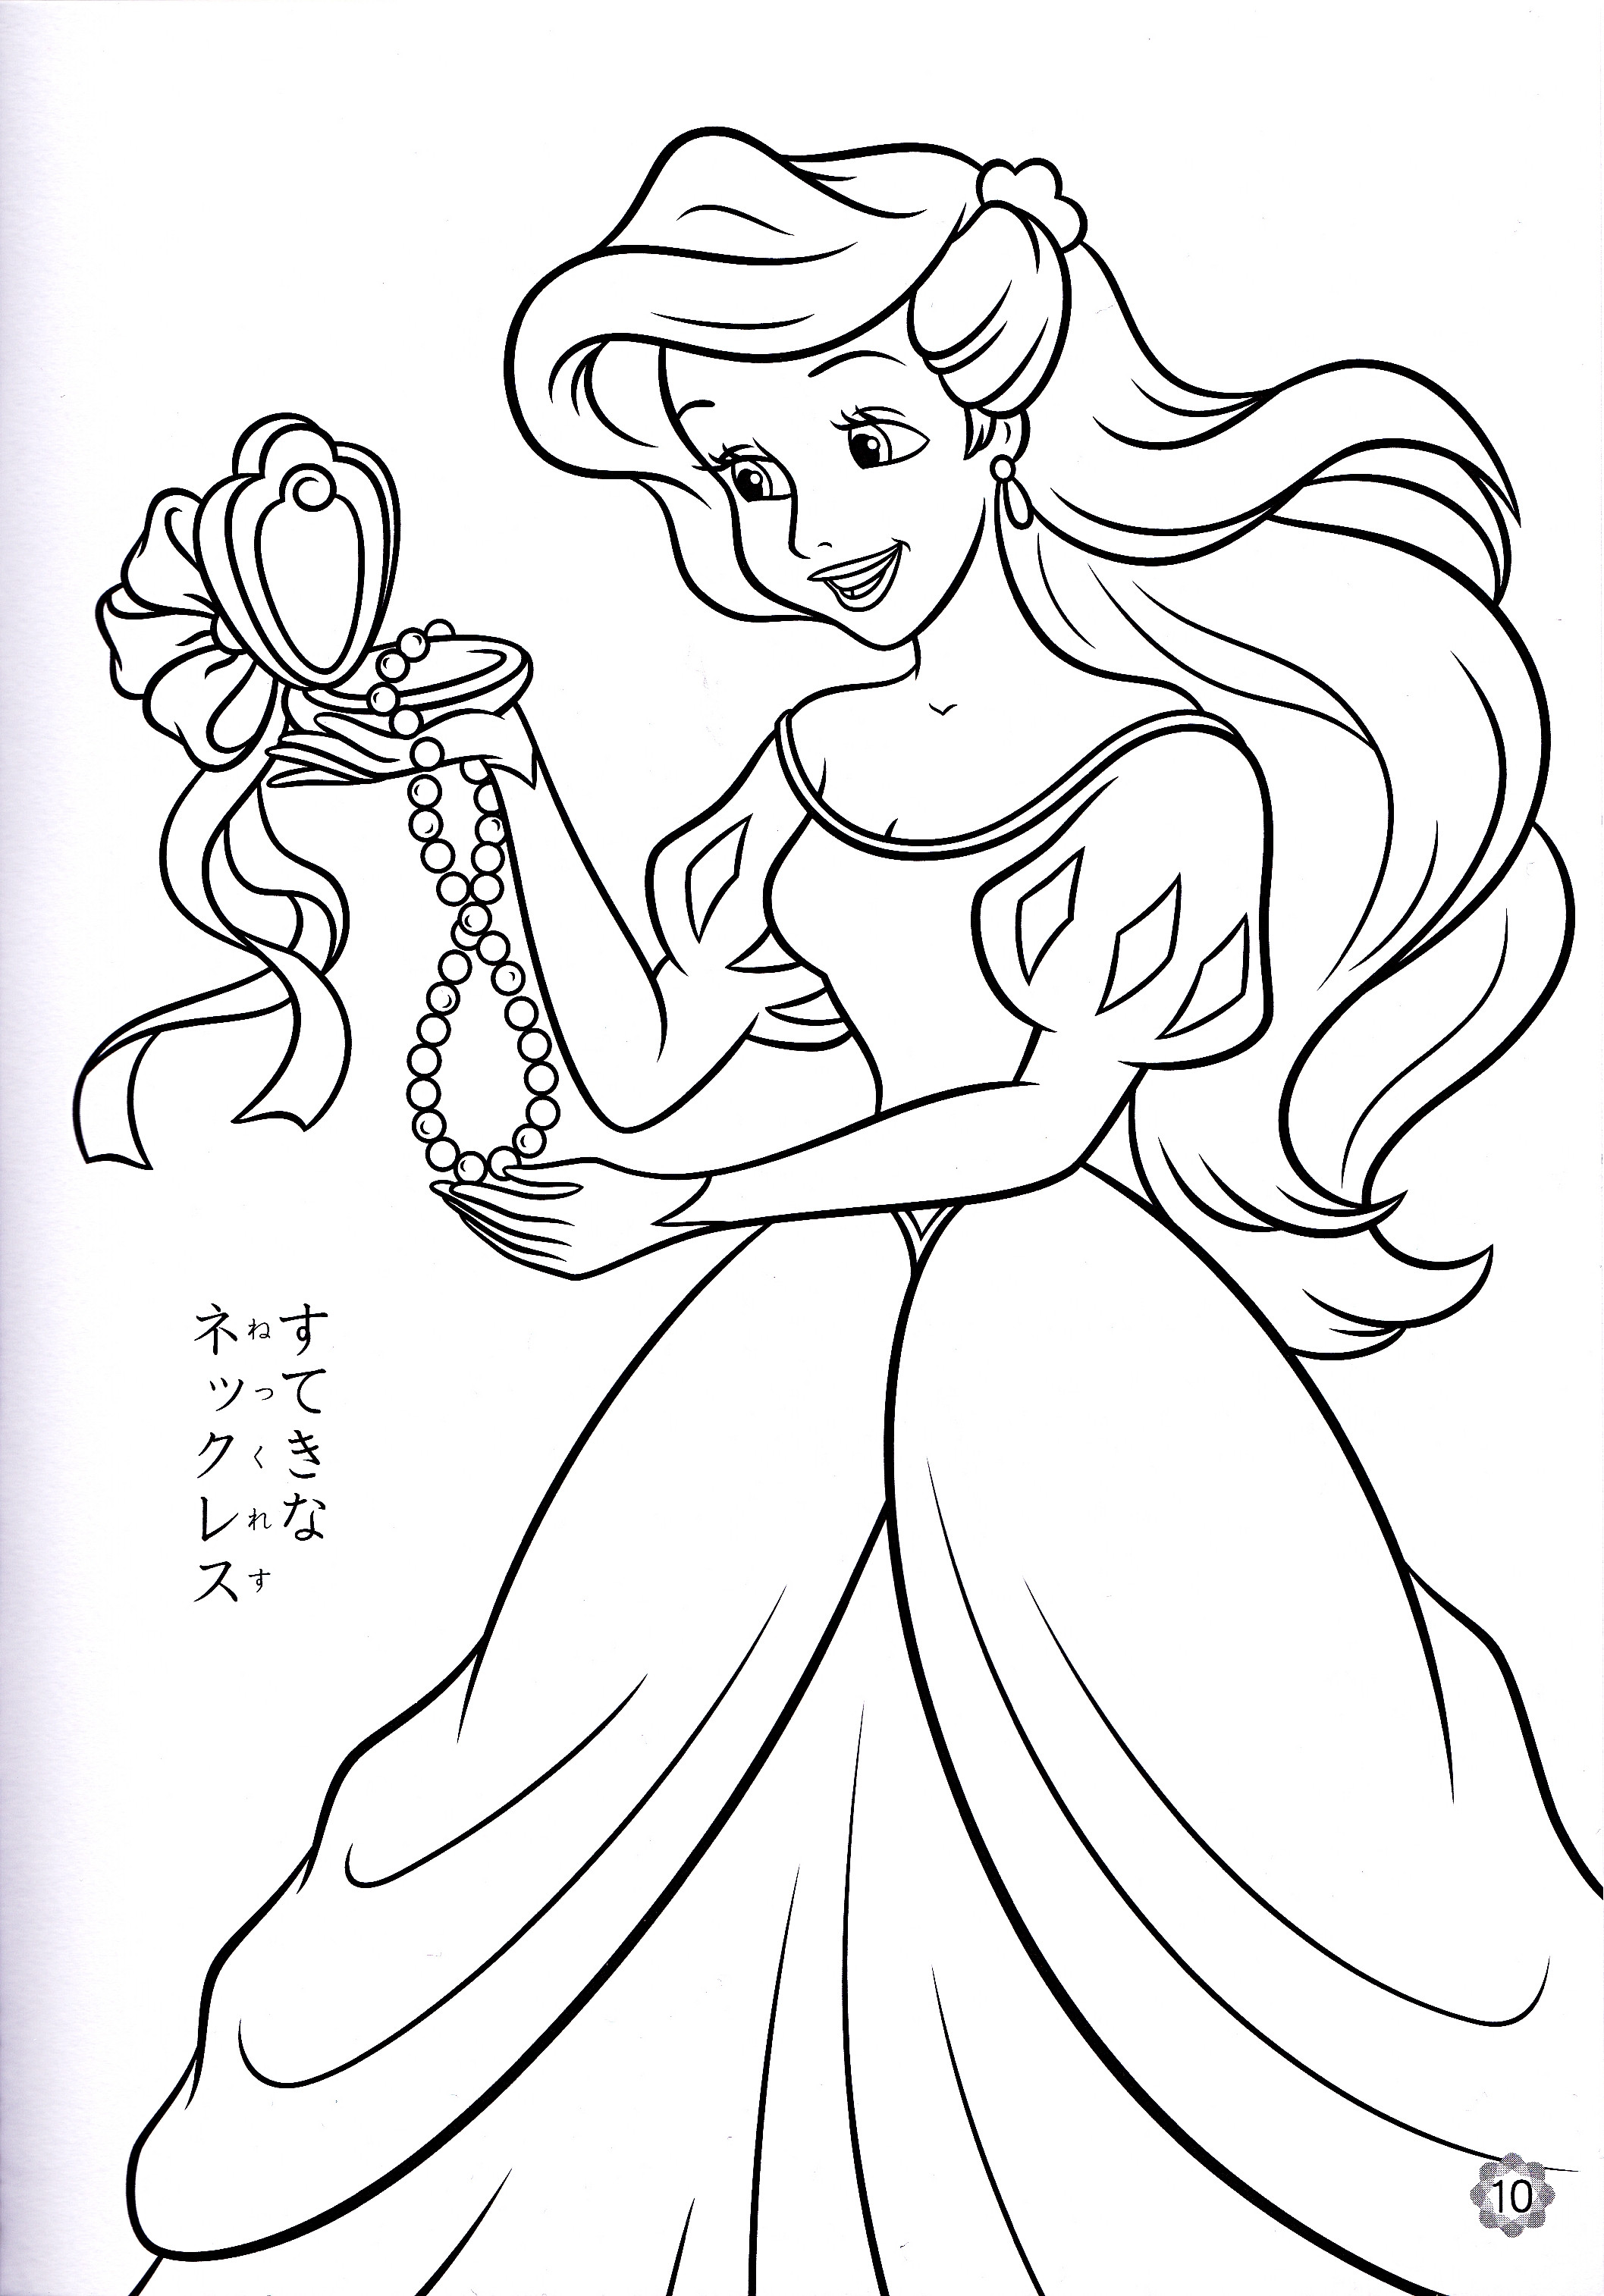 Free Coloring Sheets Disney
 Free Printable Disney Princess Coloring Pages For Kids